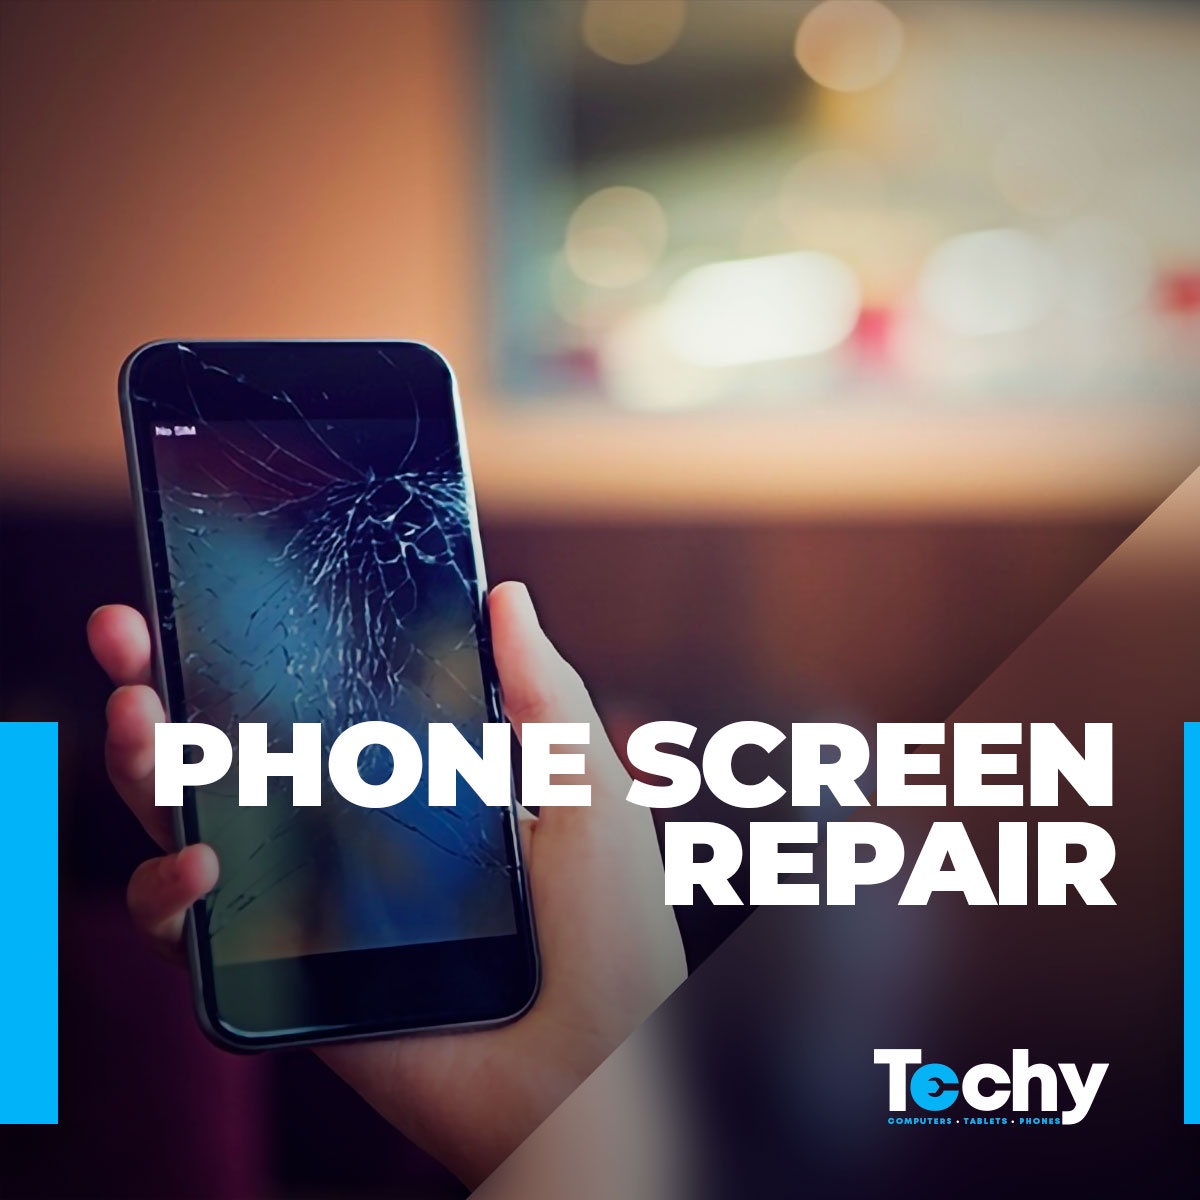 Everything you need to know about Phone Screens